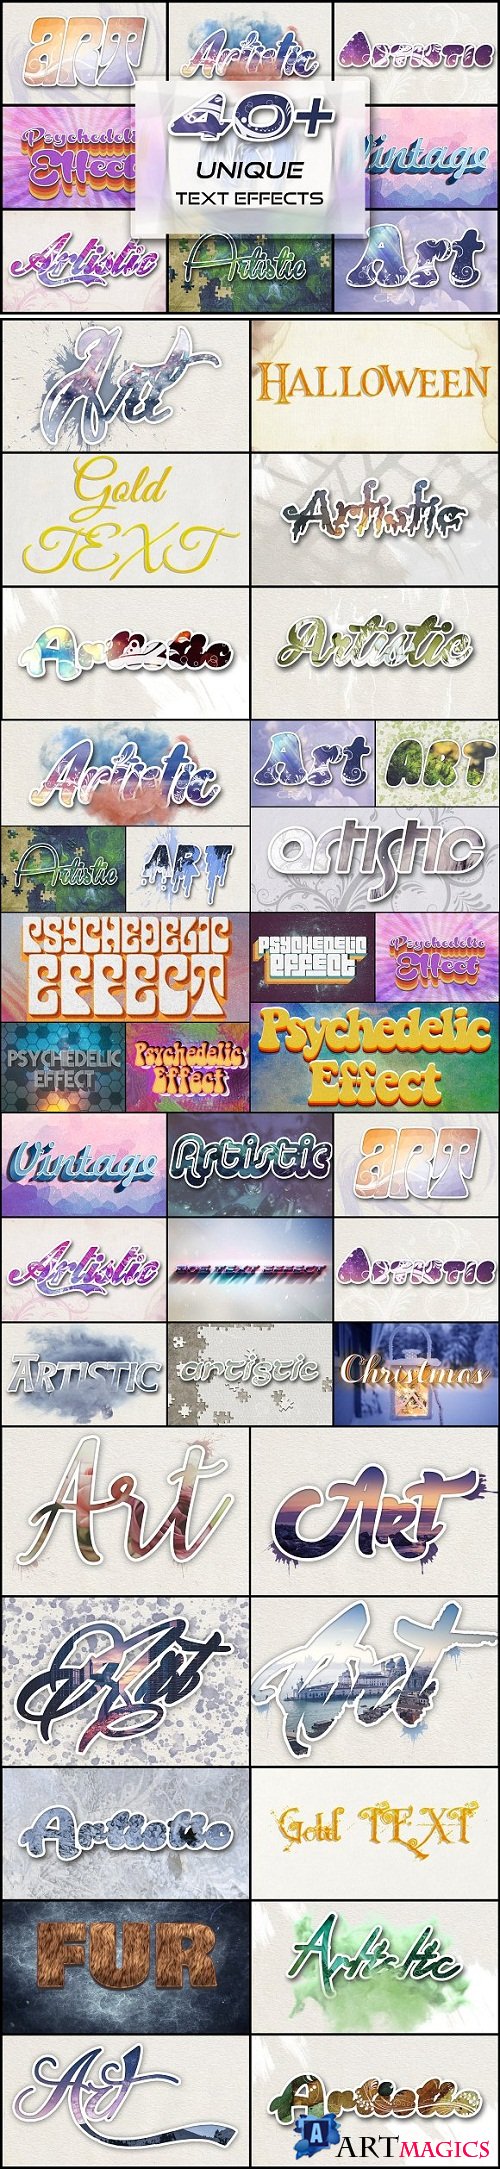 Inkydeals 40+ Unique Text Effects To Trendify Your Designs